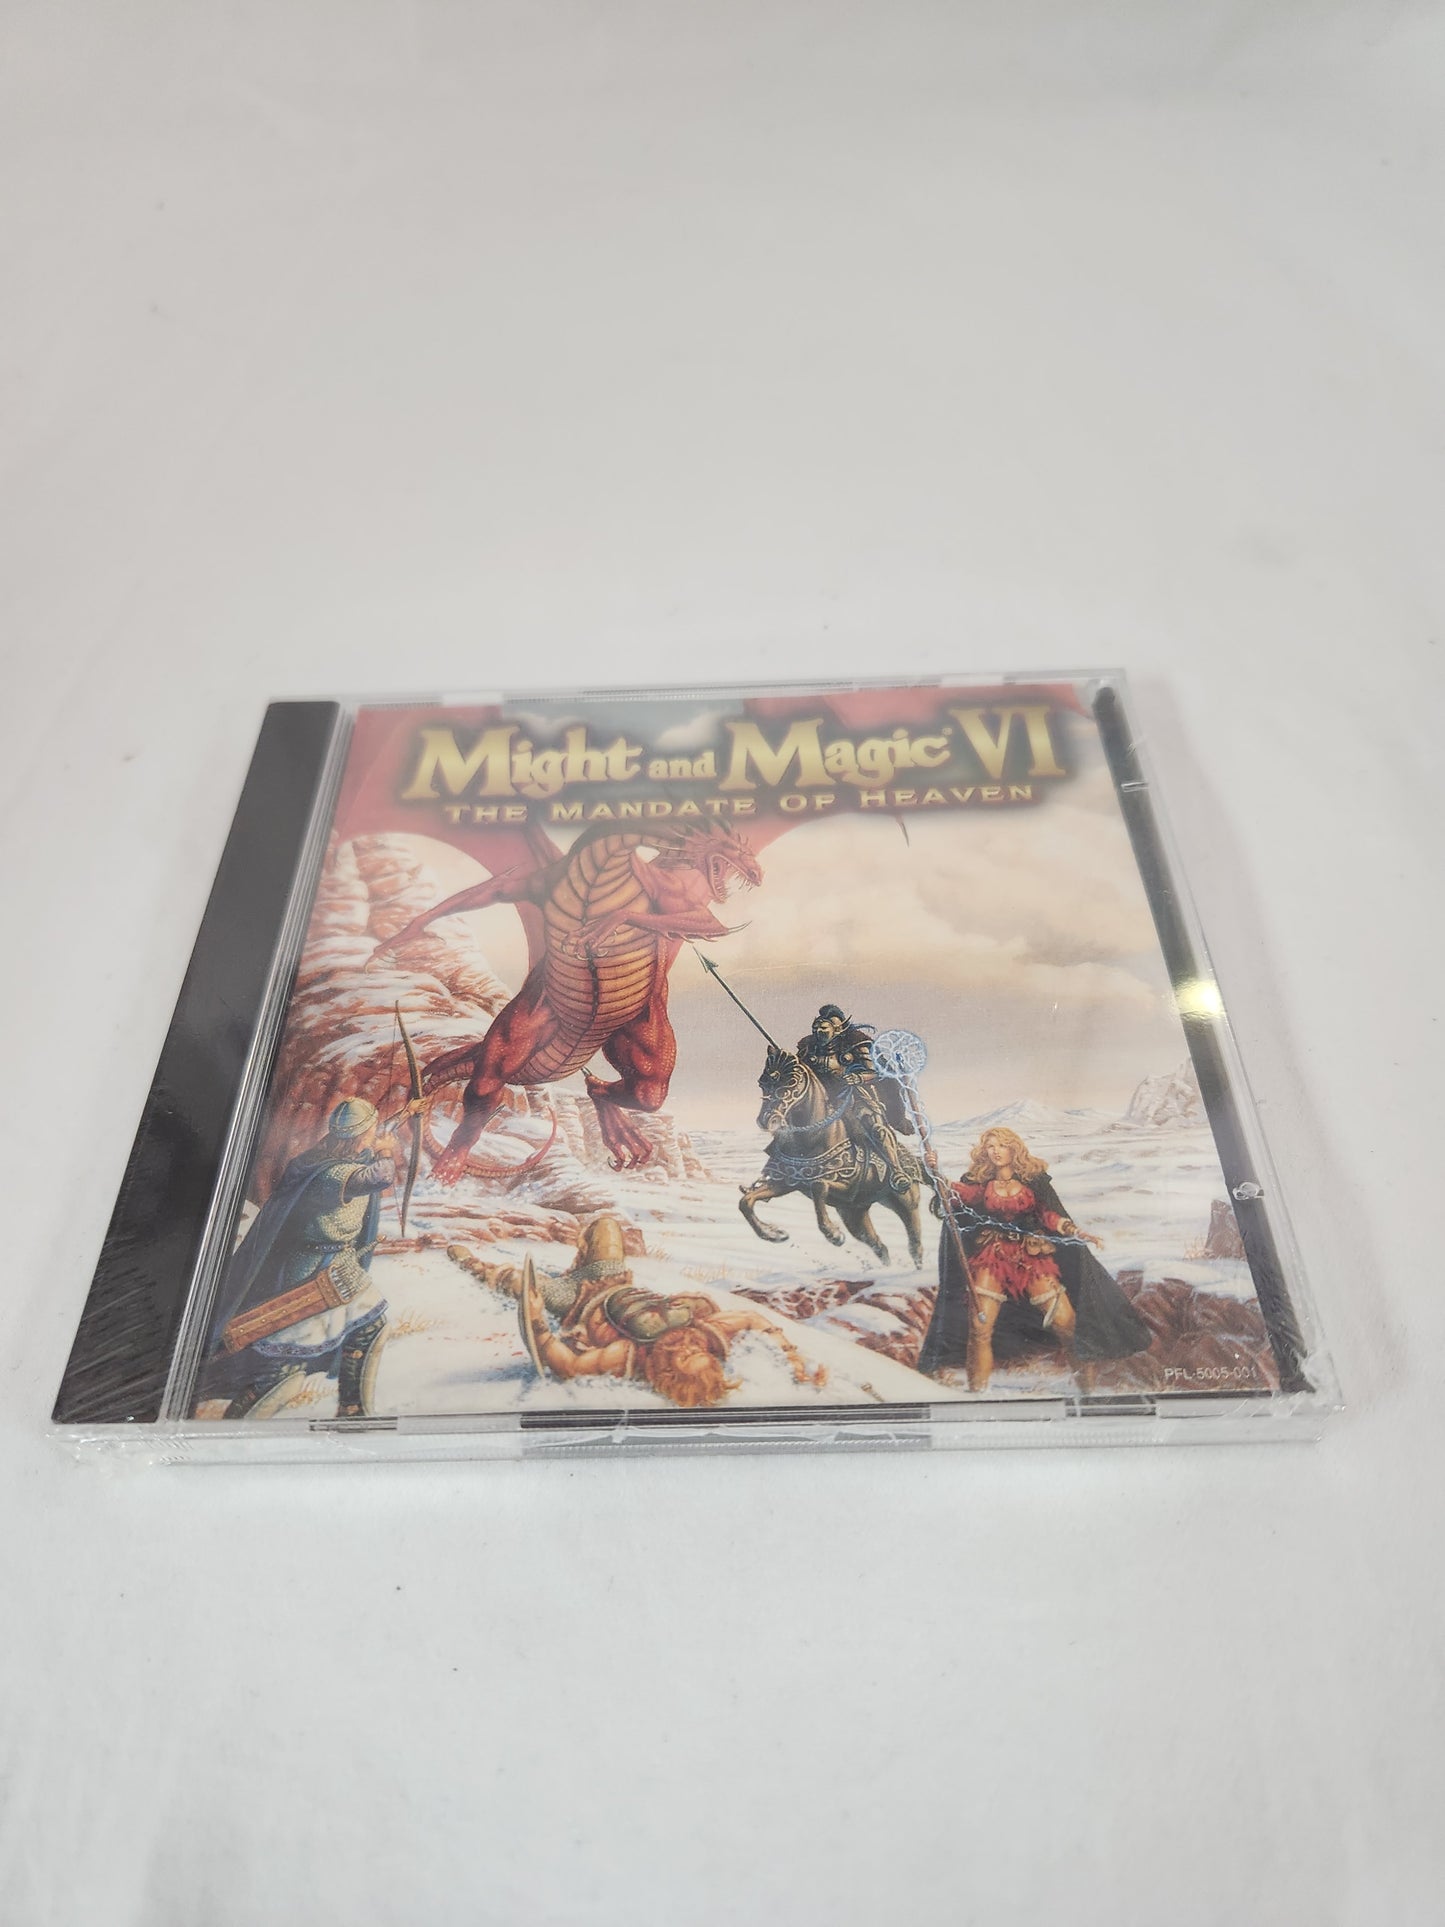 Might and Magic VI: The Mandate of Heaven PC-CD Game (1998)